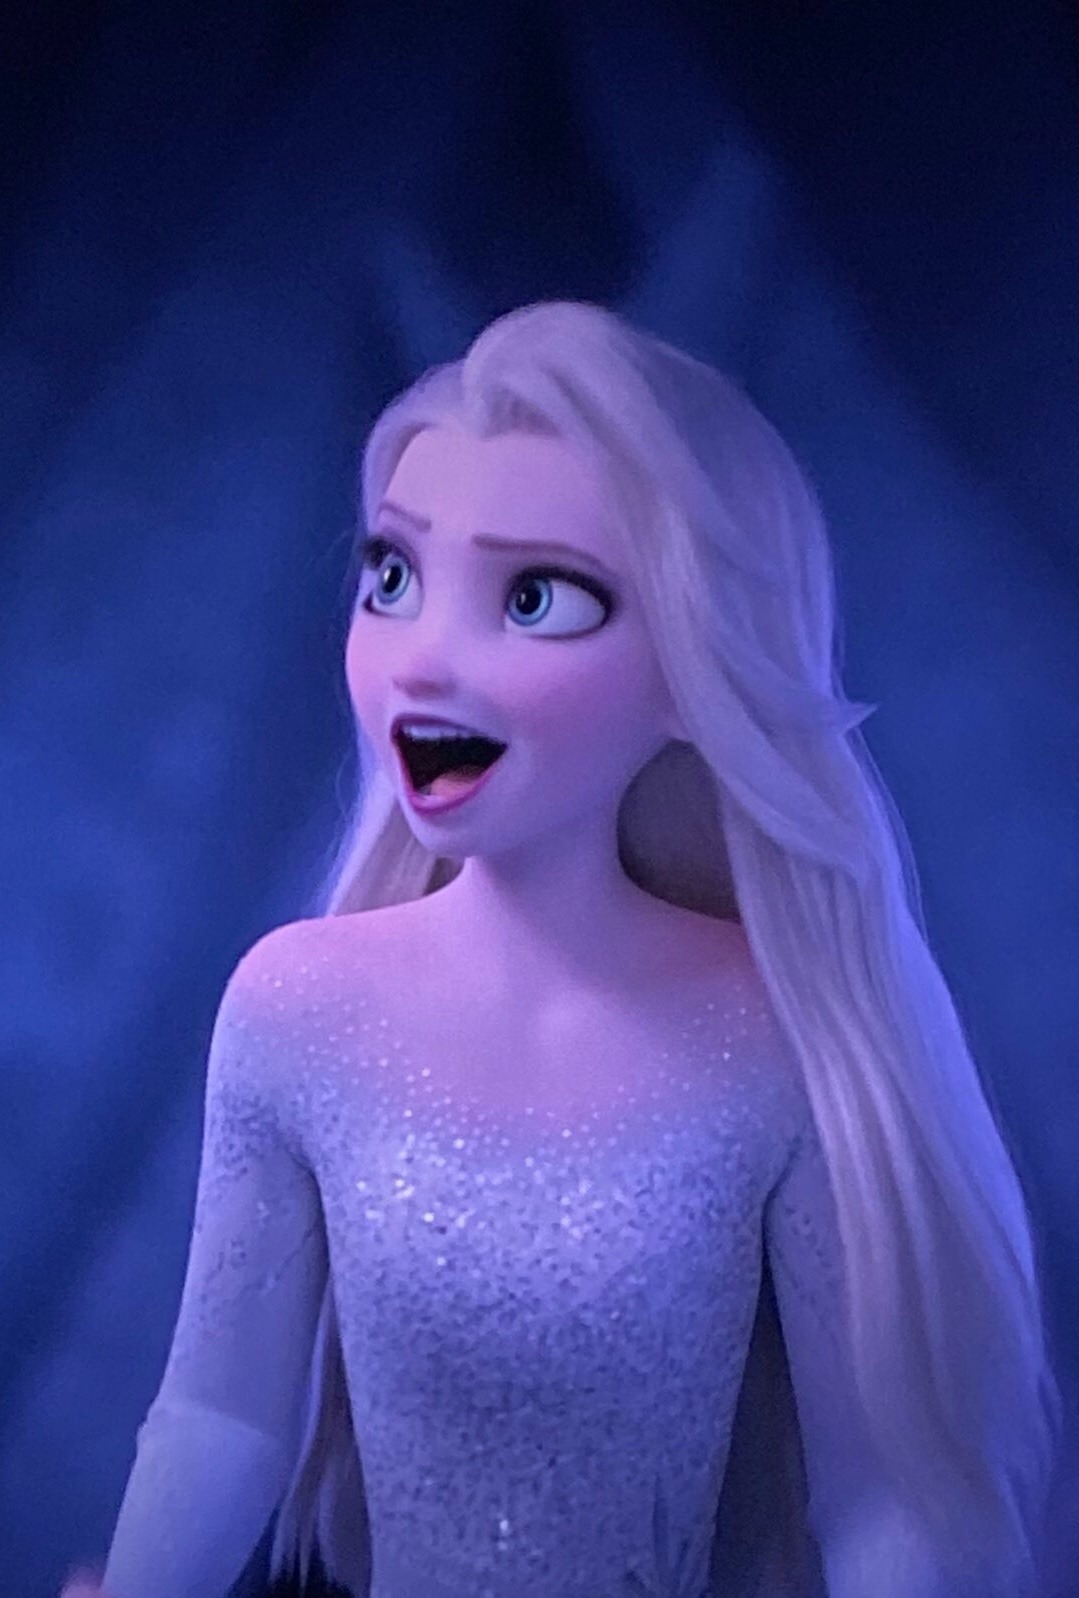 Images With Elsa In Her New Snow Queen Look With Her Hair Down From